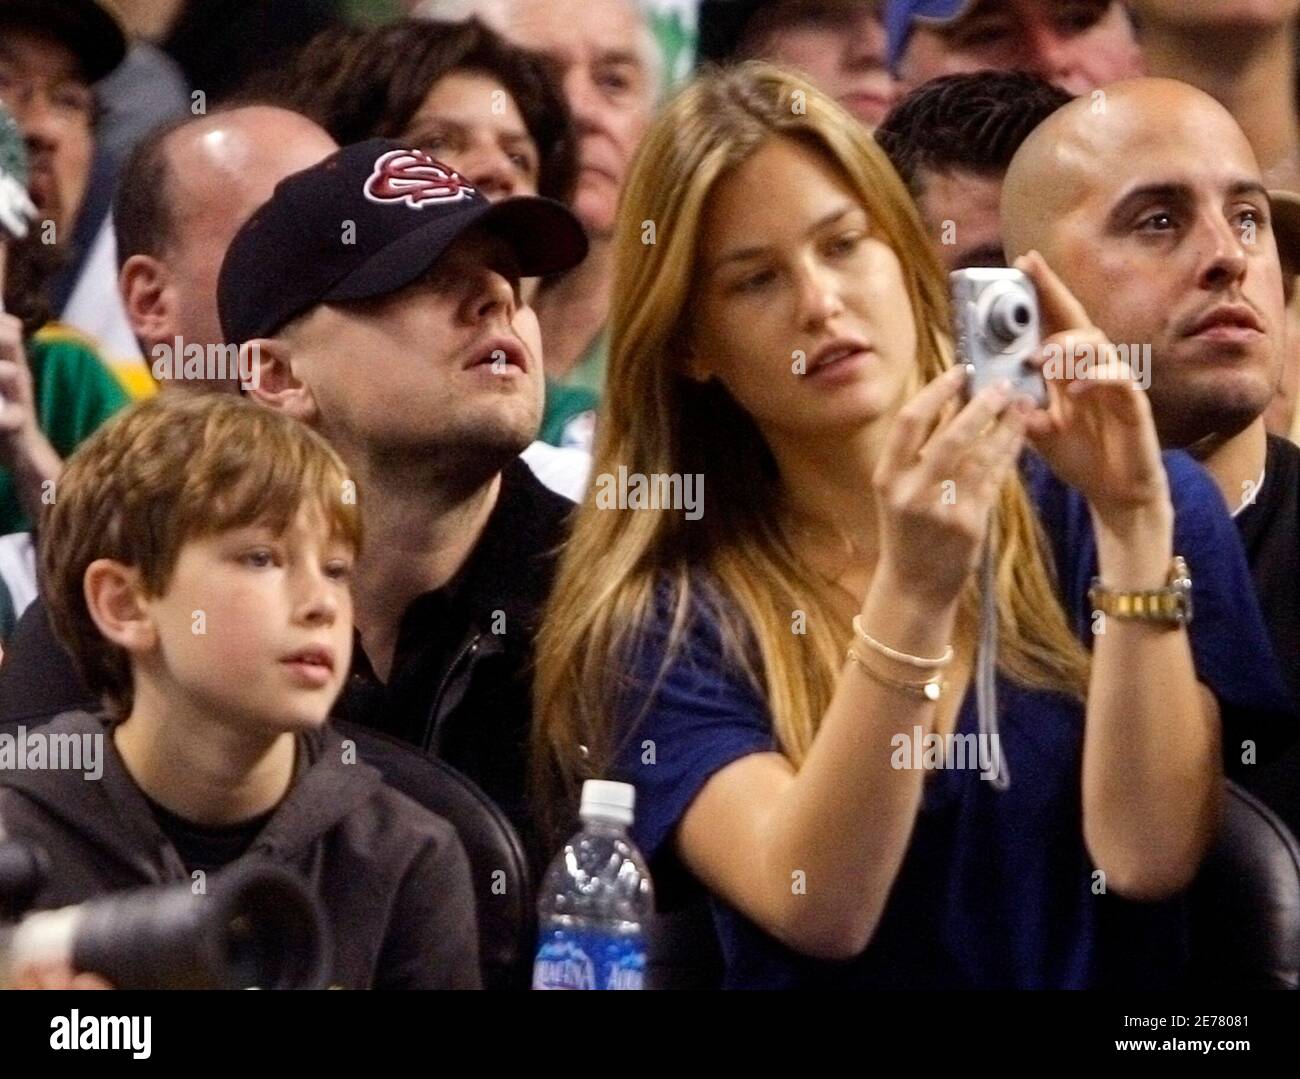 Moedig Automatisch faillissement Bar Refaeli And Leonardo Dicaprio High Resolution Stock Photography and  Images - Alamy